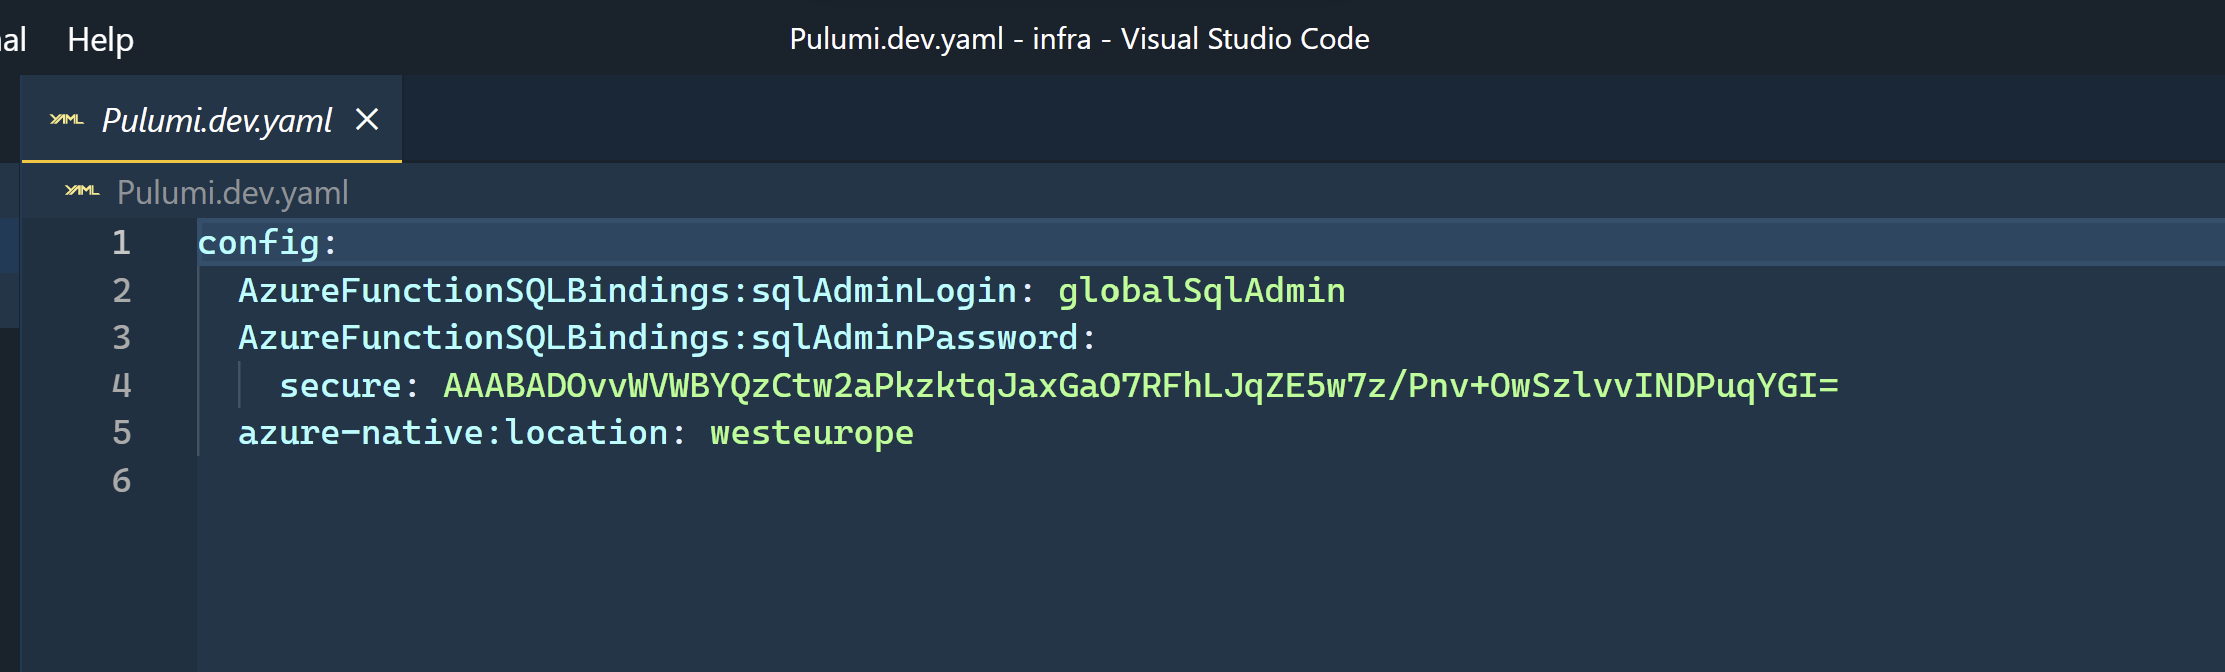 Pulumi.dev.yaml file with encrypted settings.